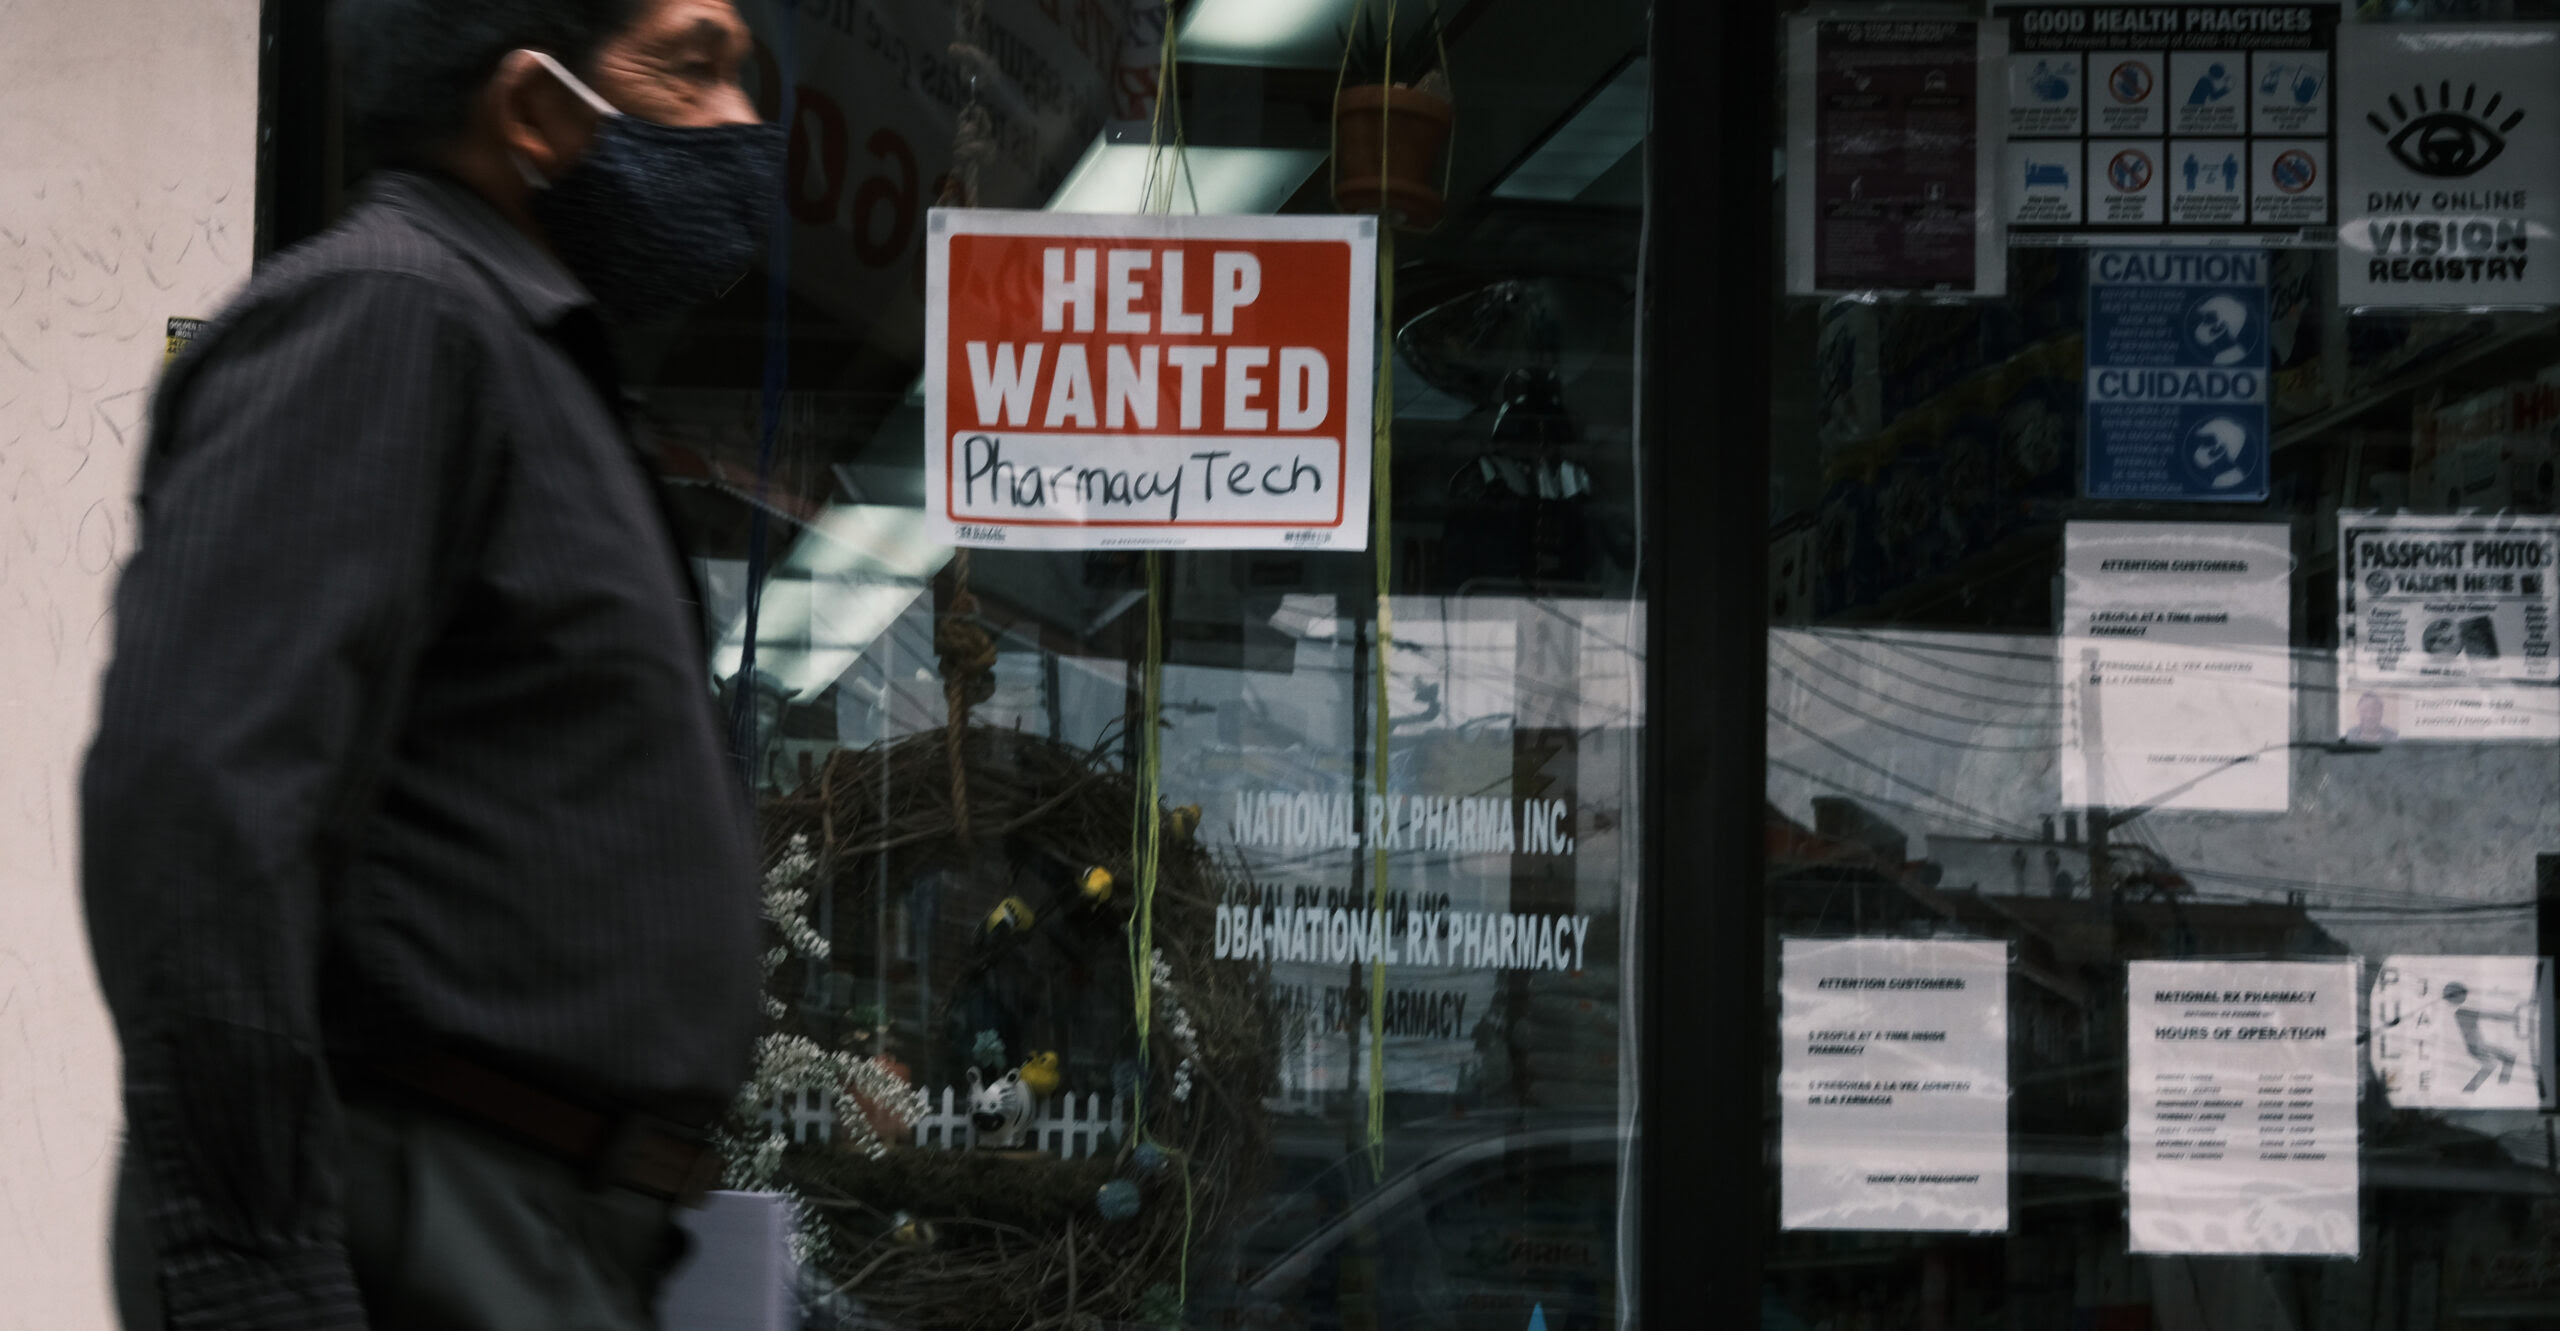 4 Reasons Why Federal Government Shouldn’t Permanently Expand Jobless Benefits